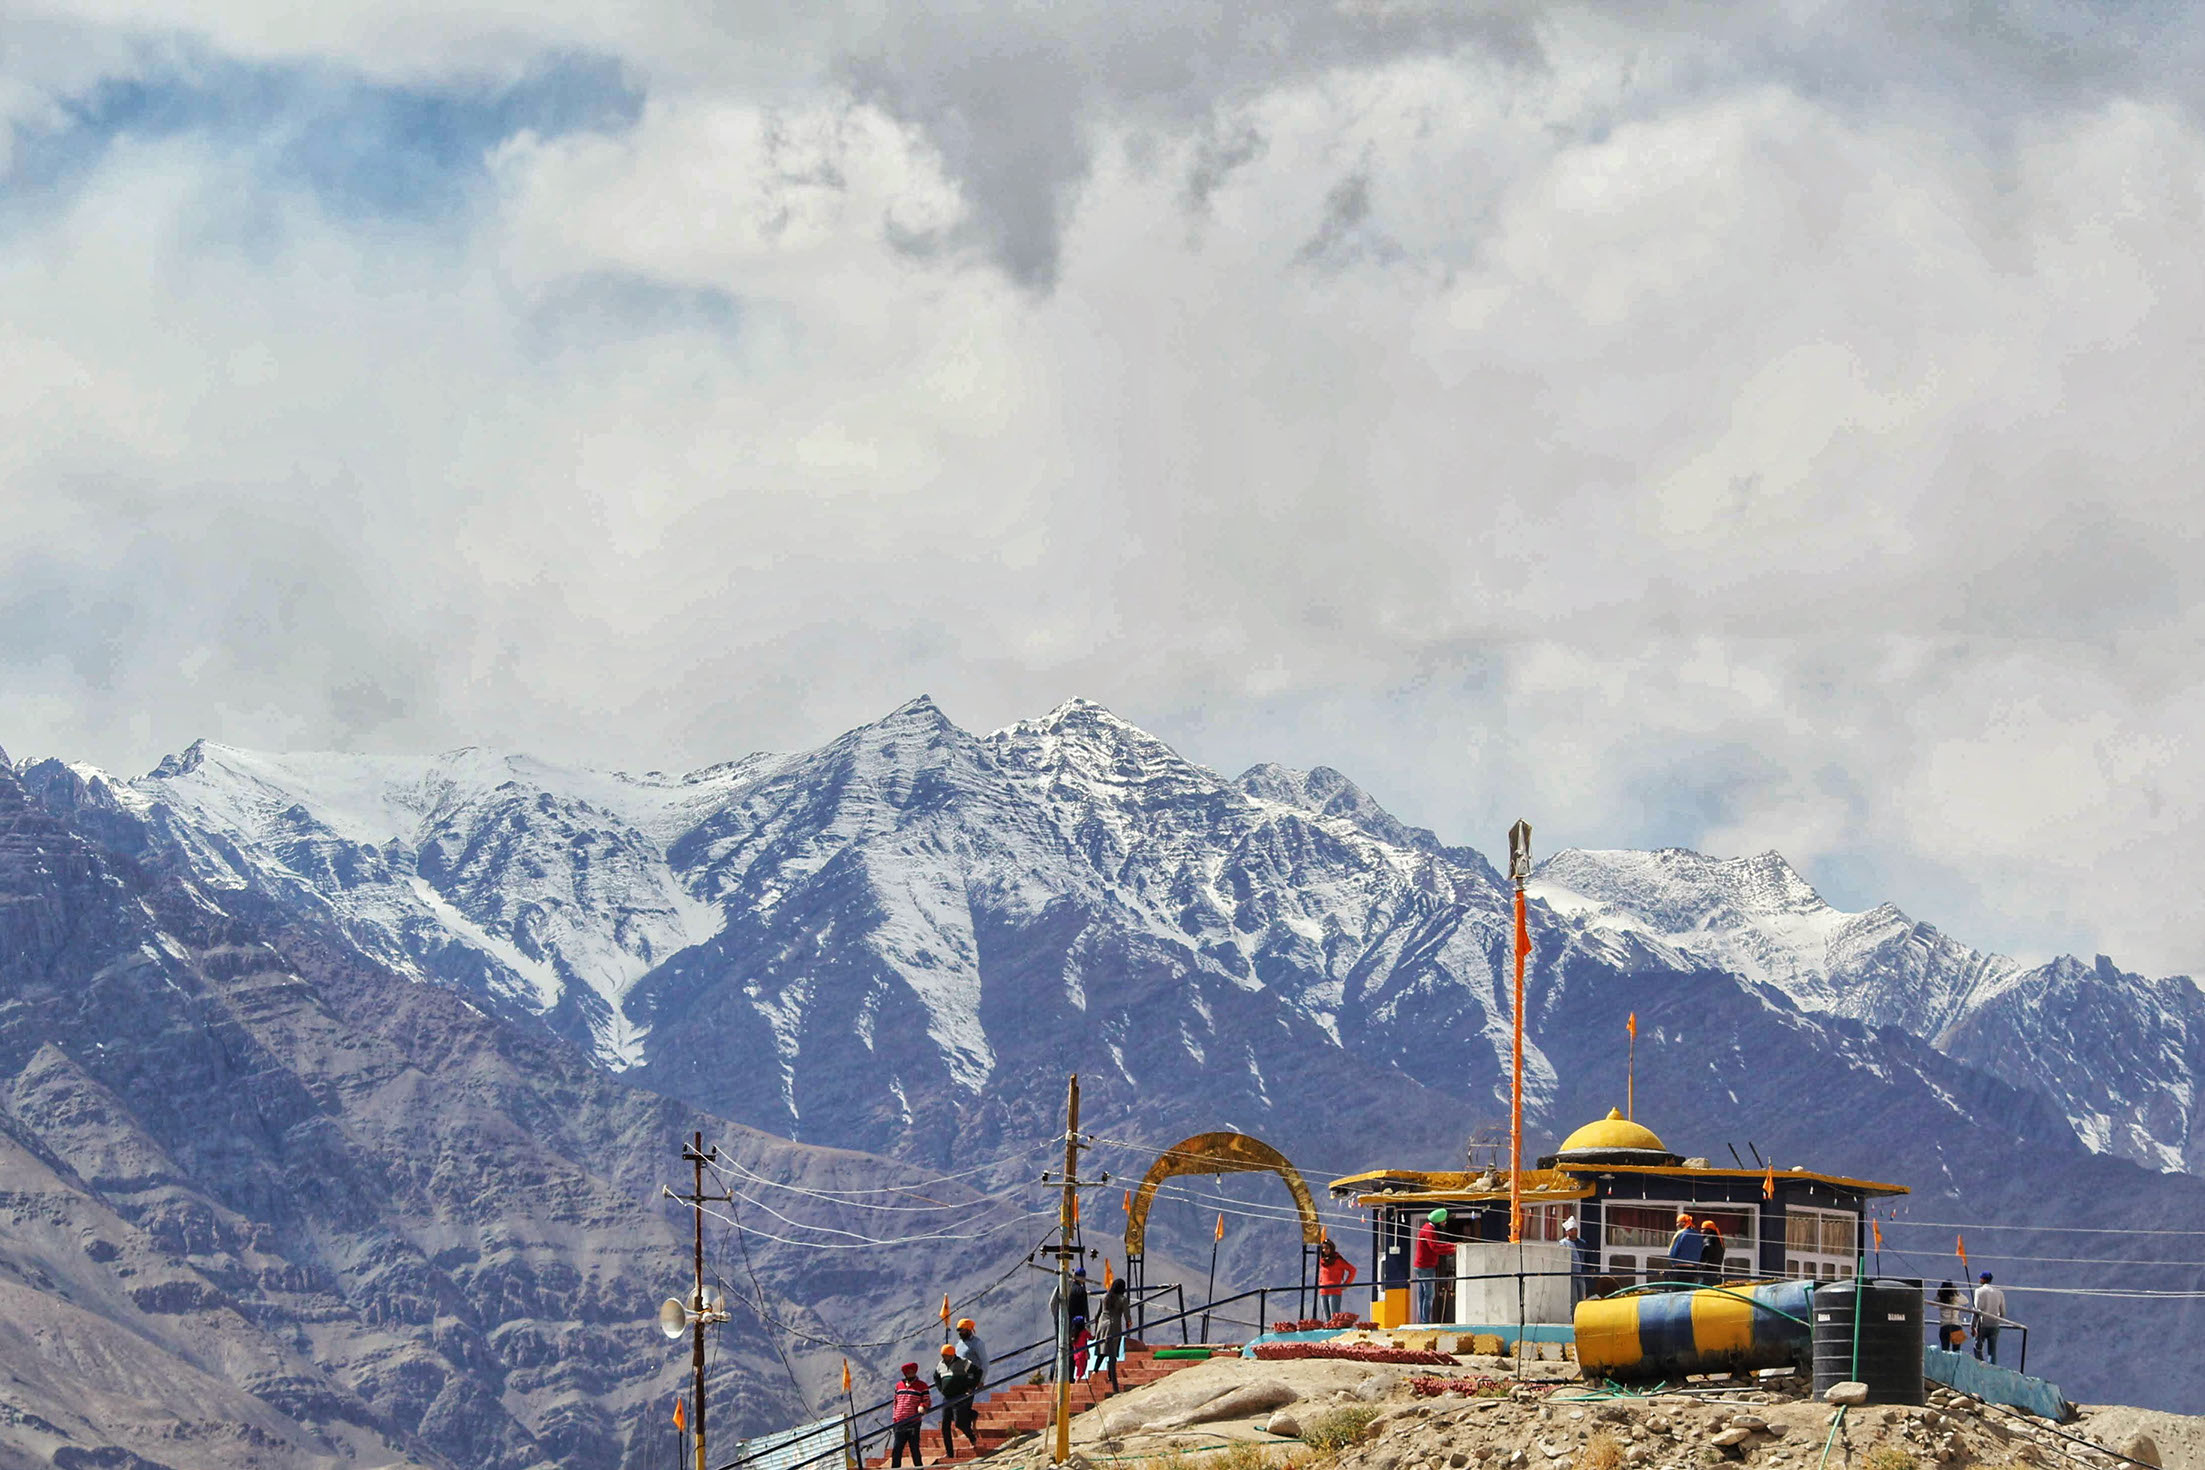 Gurudwara Shri Pathar Sahib is surrounded by the magnificent snow-covered mountains